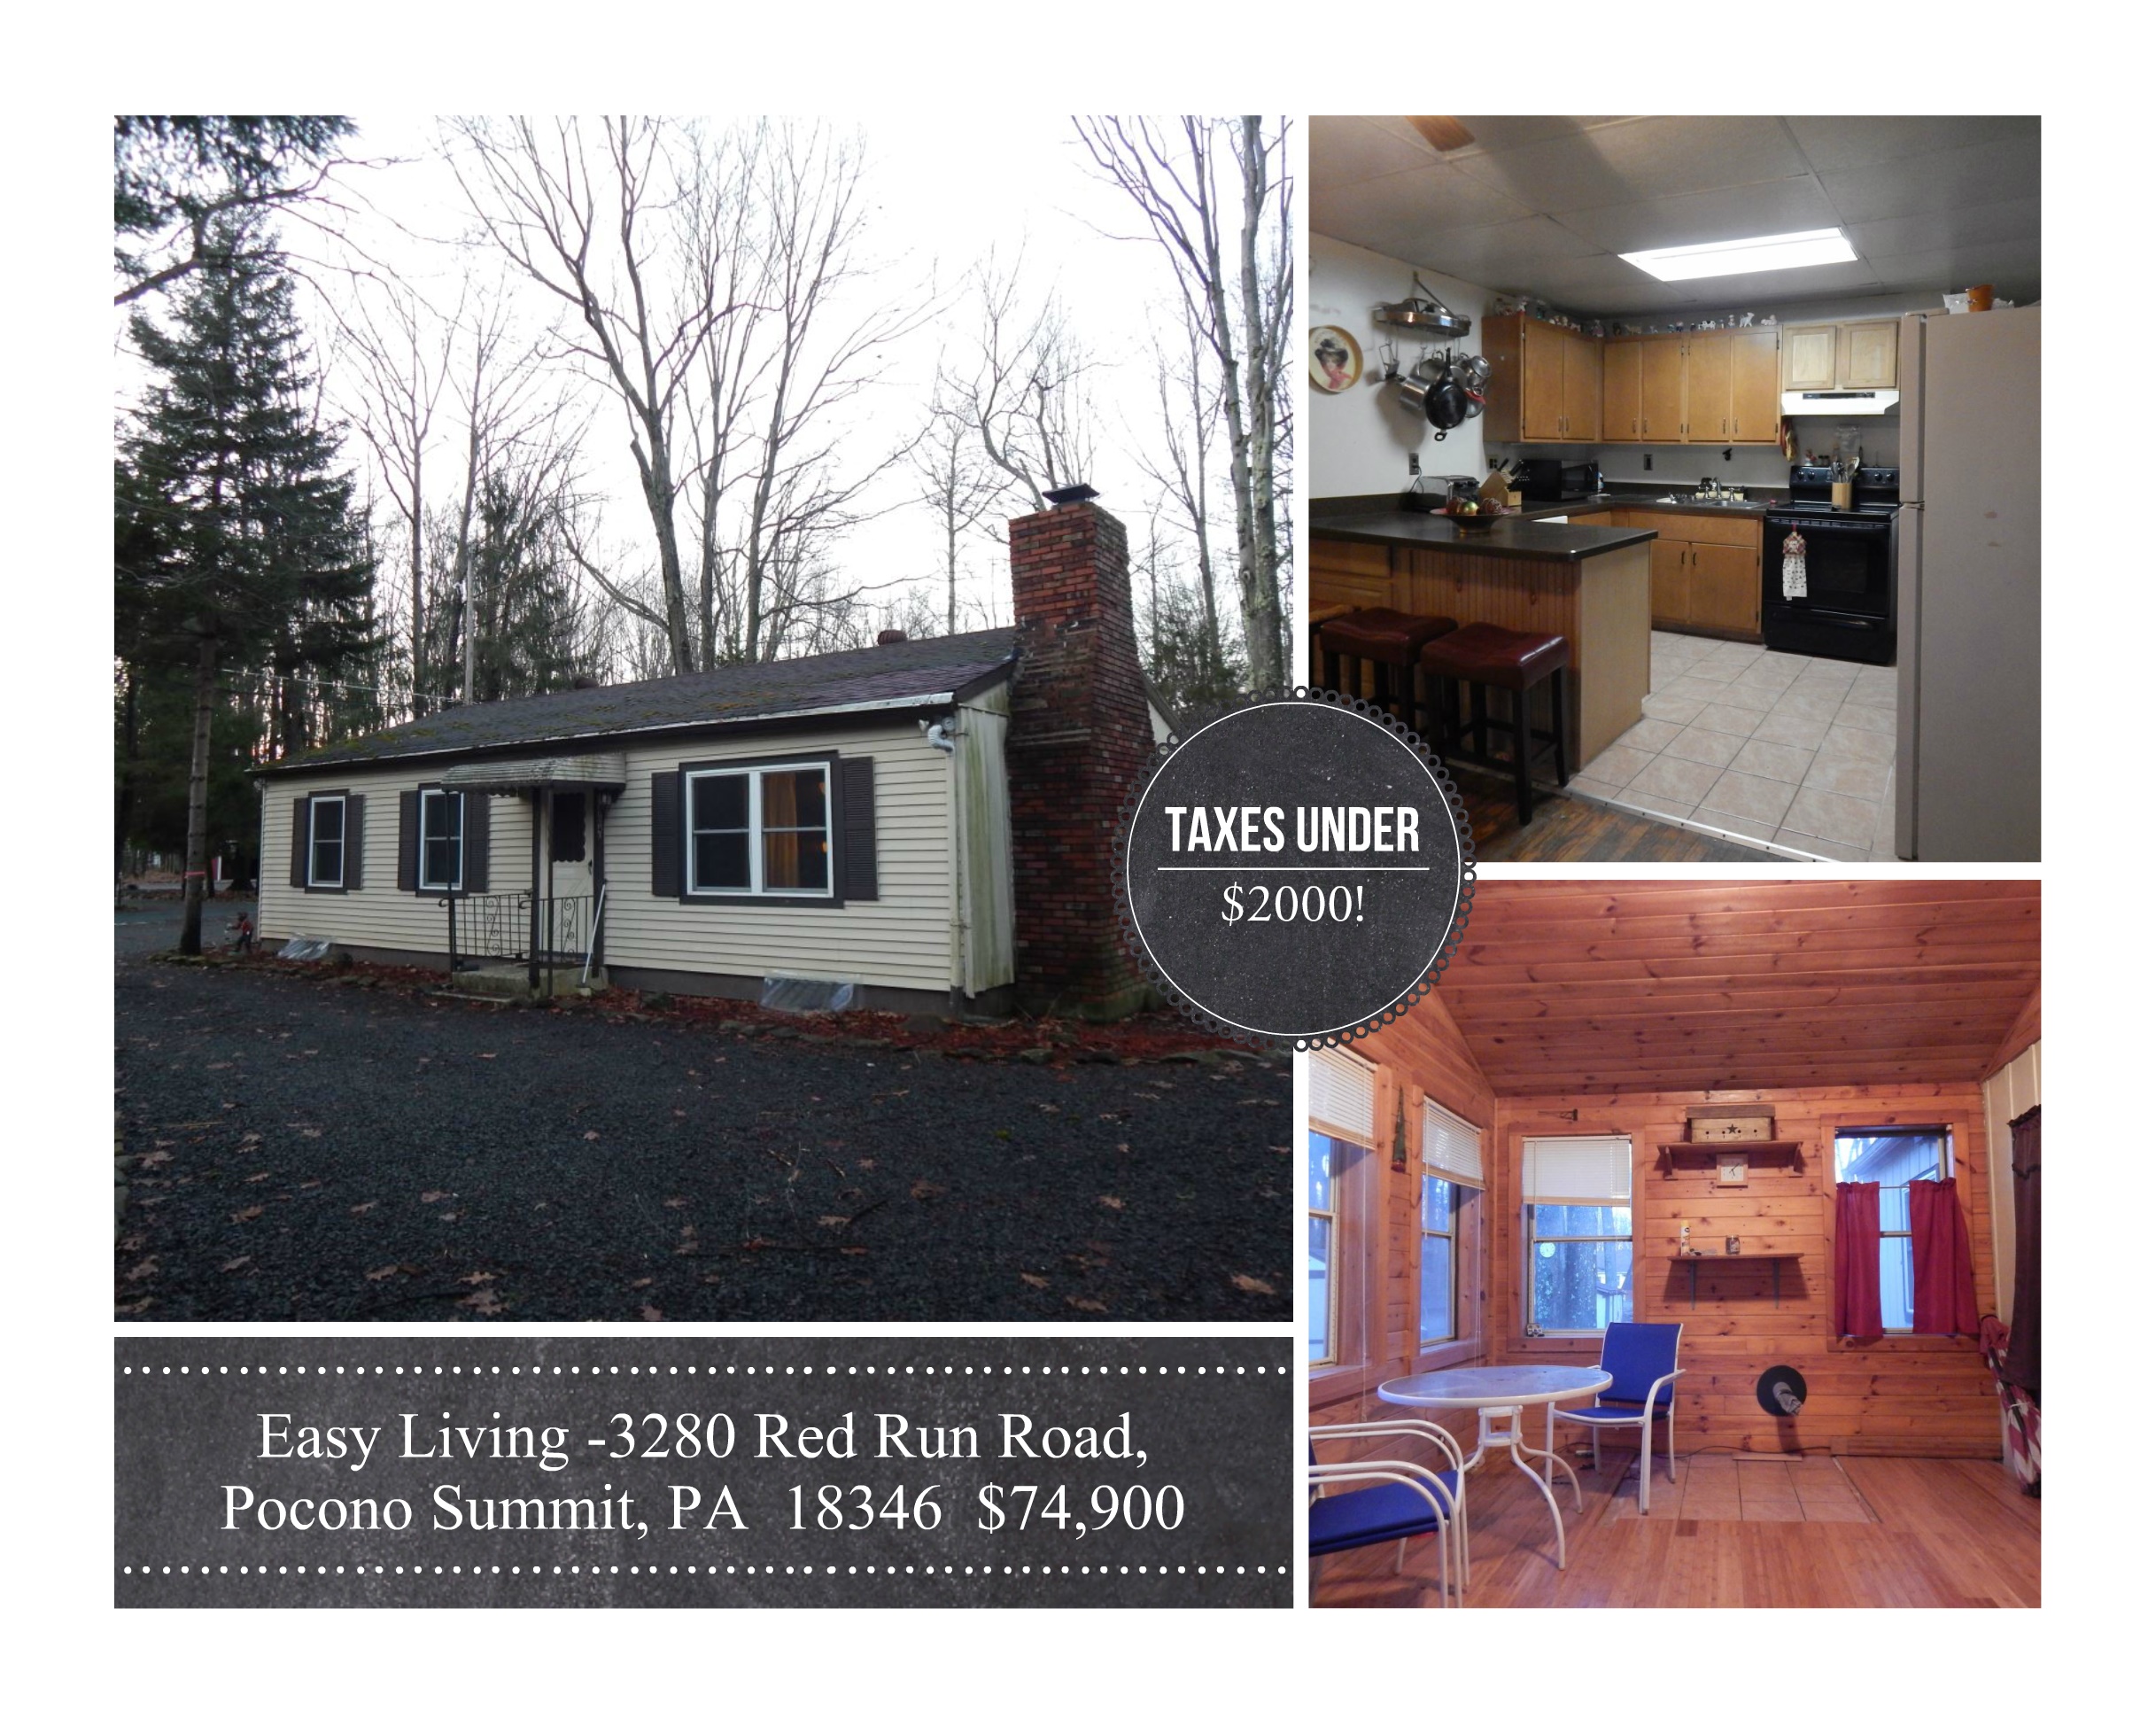 Easy living - one level.  3280 Red Run Road Pocono Summit, PA  18346  Only $73,900